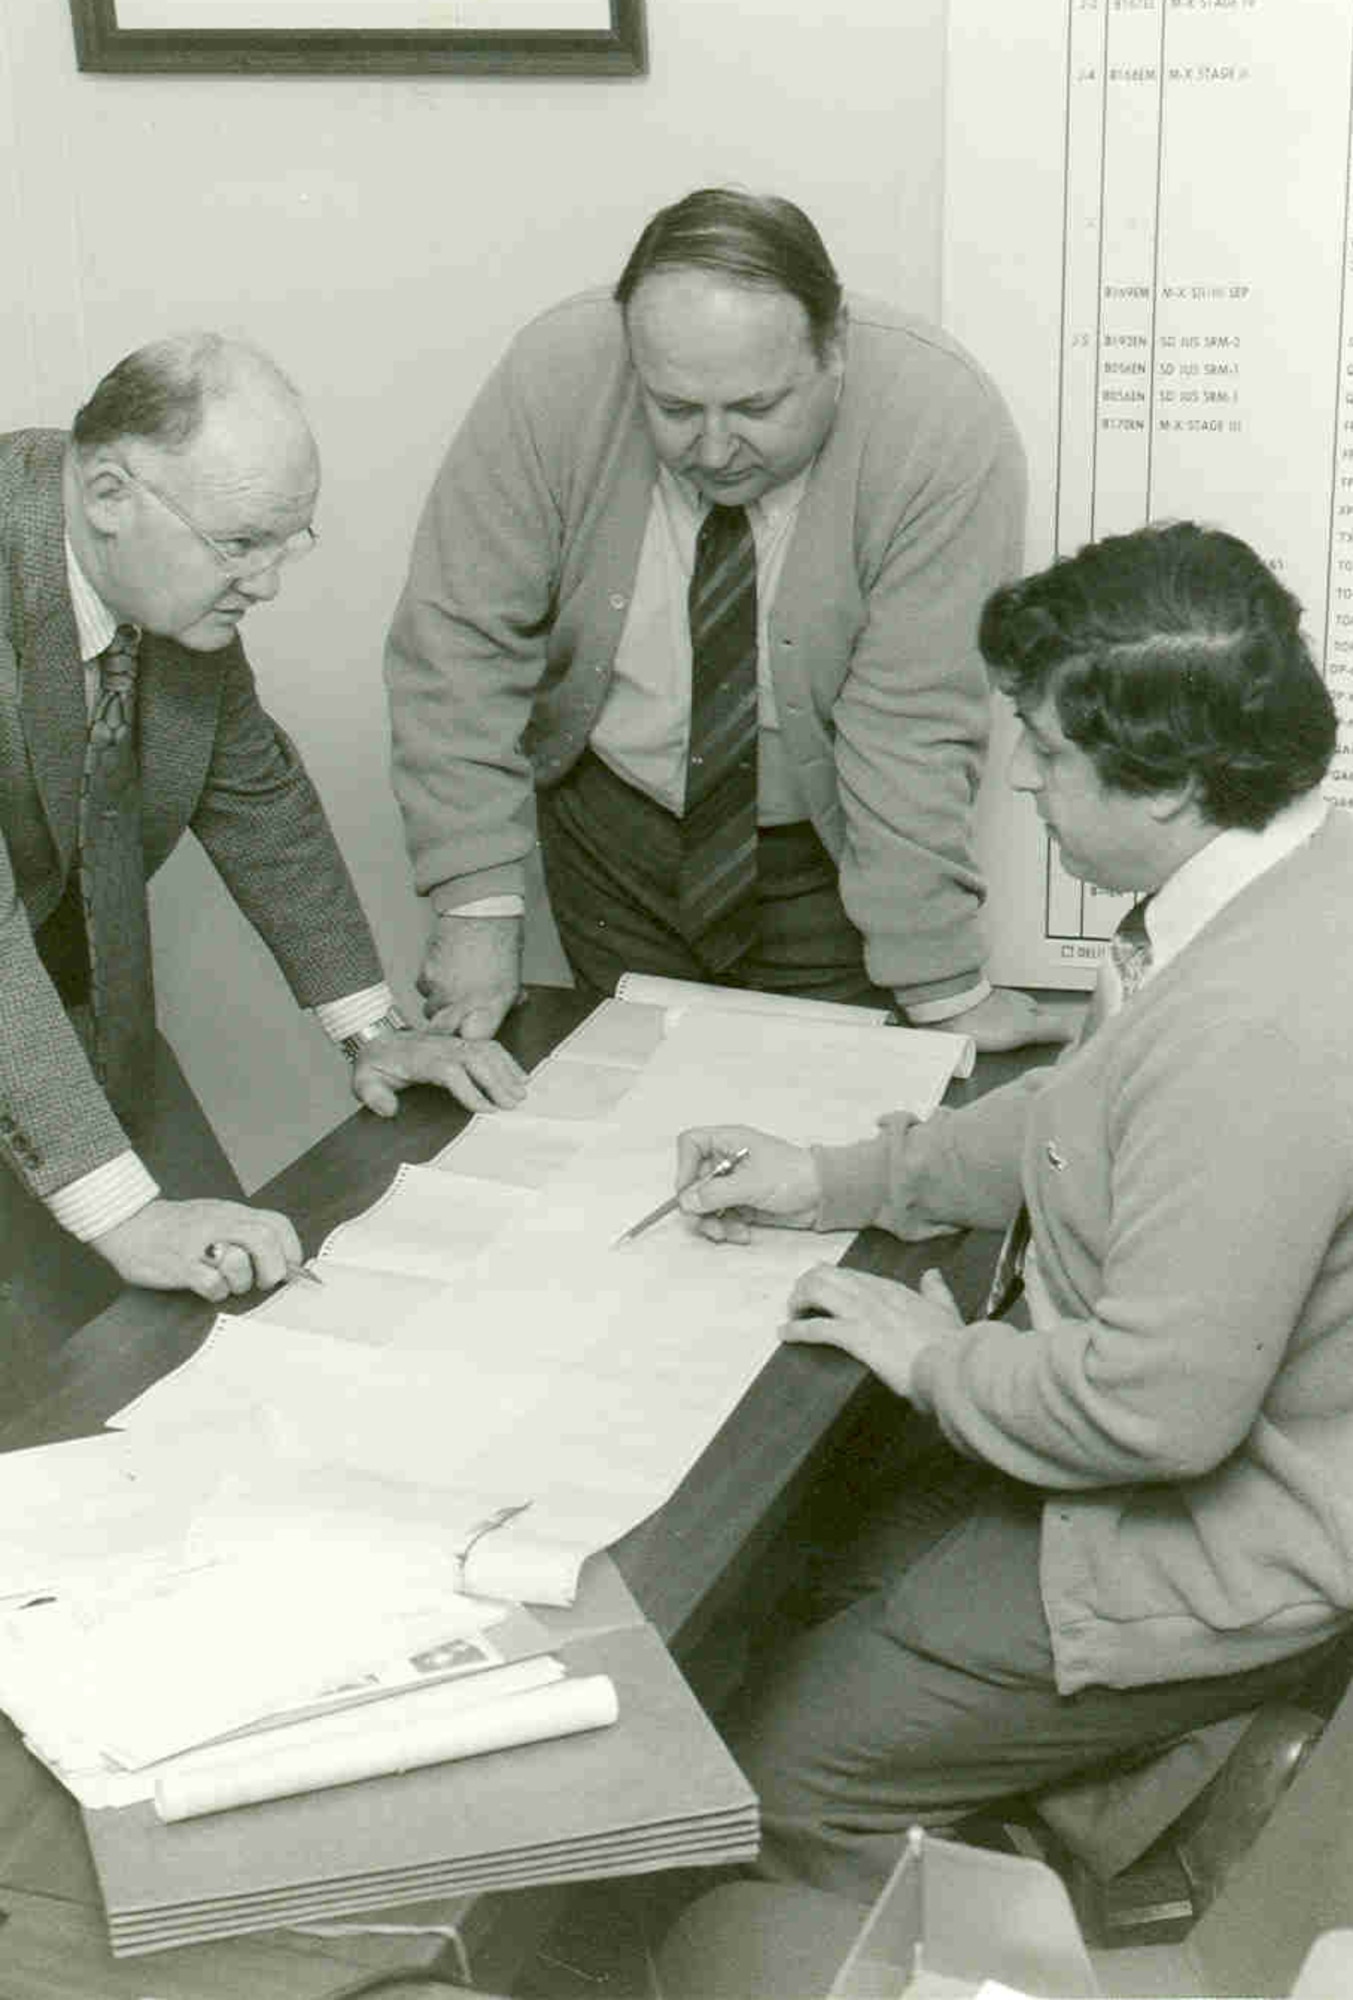 Richard Austin, left, then-deputy director of Propulsion Test at Arnold Engineering Development Center, later known as Arnold Engineering Development Complex, is among AEDC personnel who gathered to examine data collected on Space Shuttle Challenger at Marshall Space Flight Center in Huntsville, Ala., in the early 1980s. AEDC was instrumental in identifying the source of hydrogen leaking from within the Challenger’s main motors. Also pictured are Alex Domal, center, then-acting chief of the AEDC Rocket Division of the Directorate of Propulsion Test, and Vince Zaccardi, research engineer with AEDC’s then-aeropropulsion test contractor. (U.S. Air Force photo by Phil Tarver)